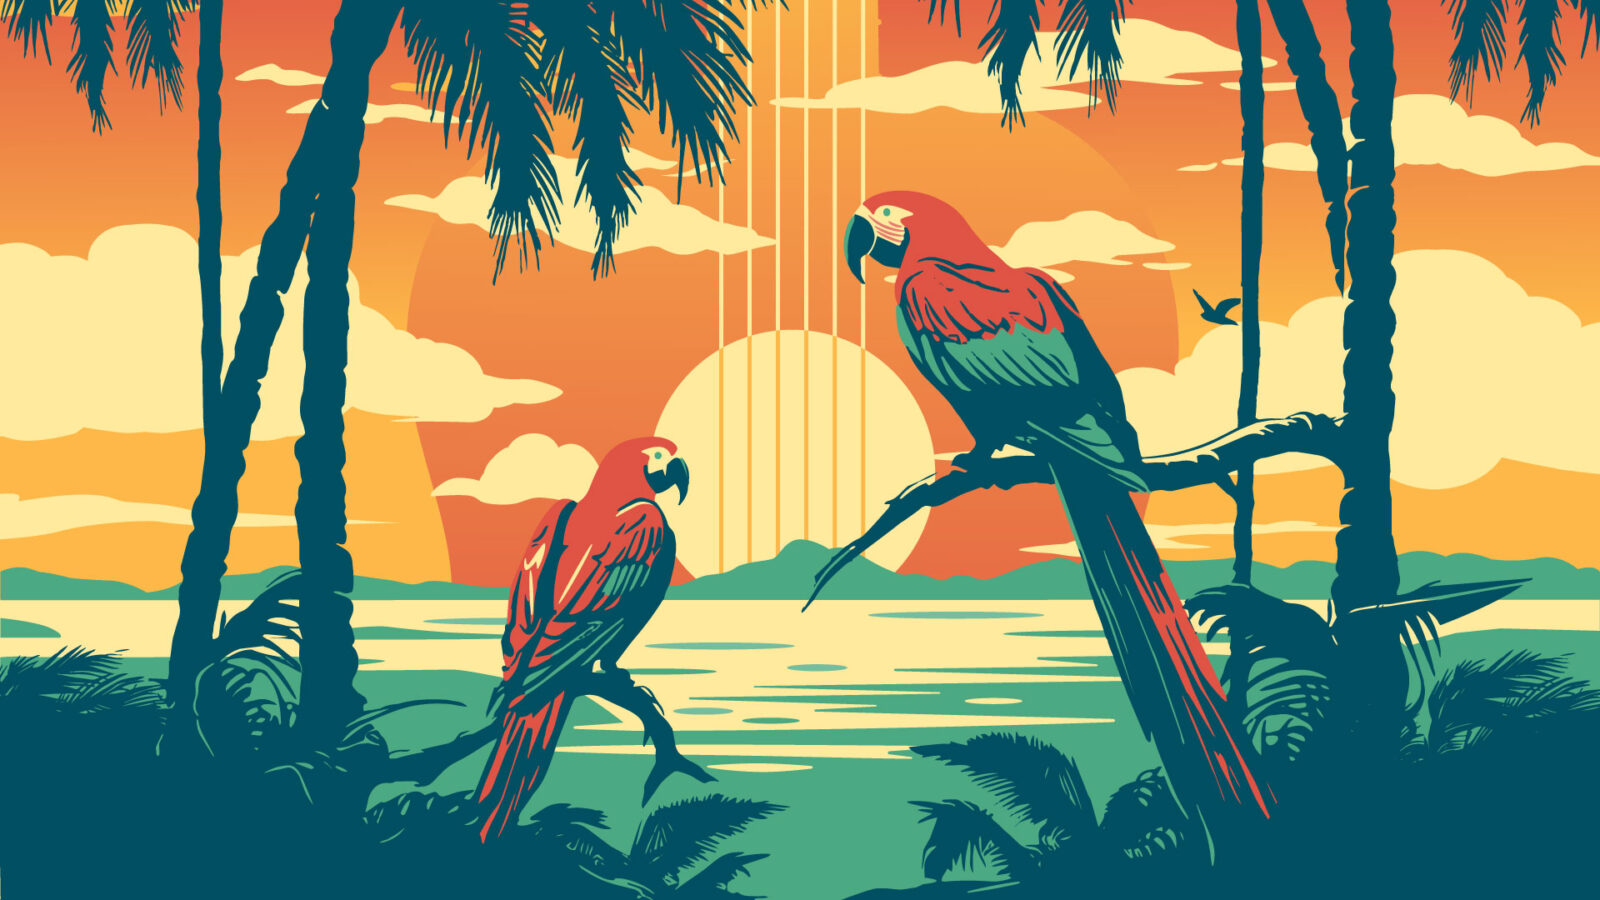 Image of two macaws.